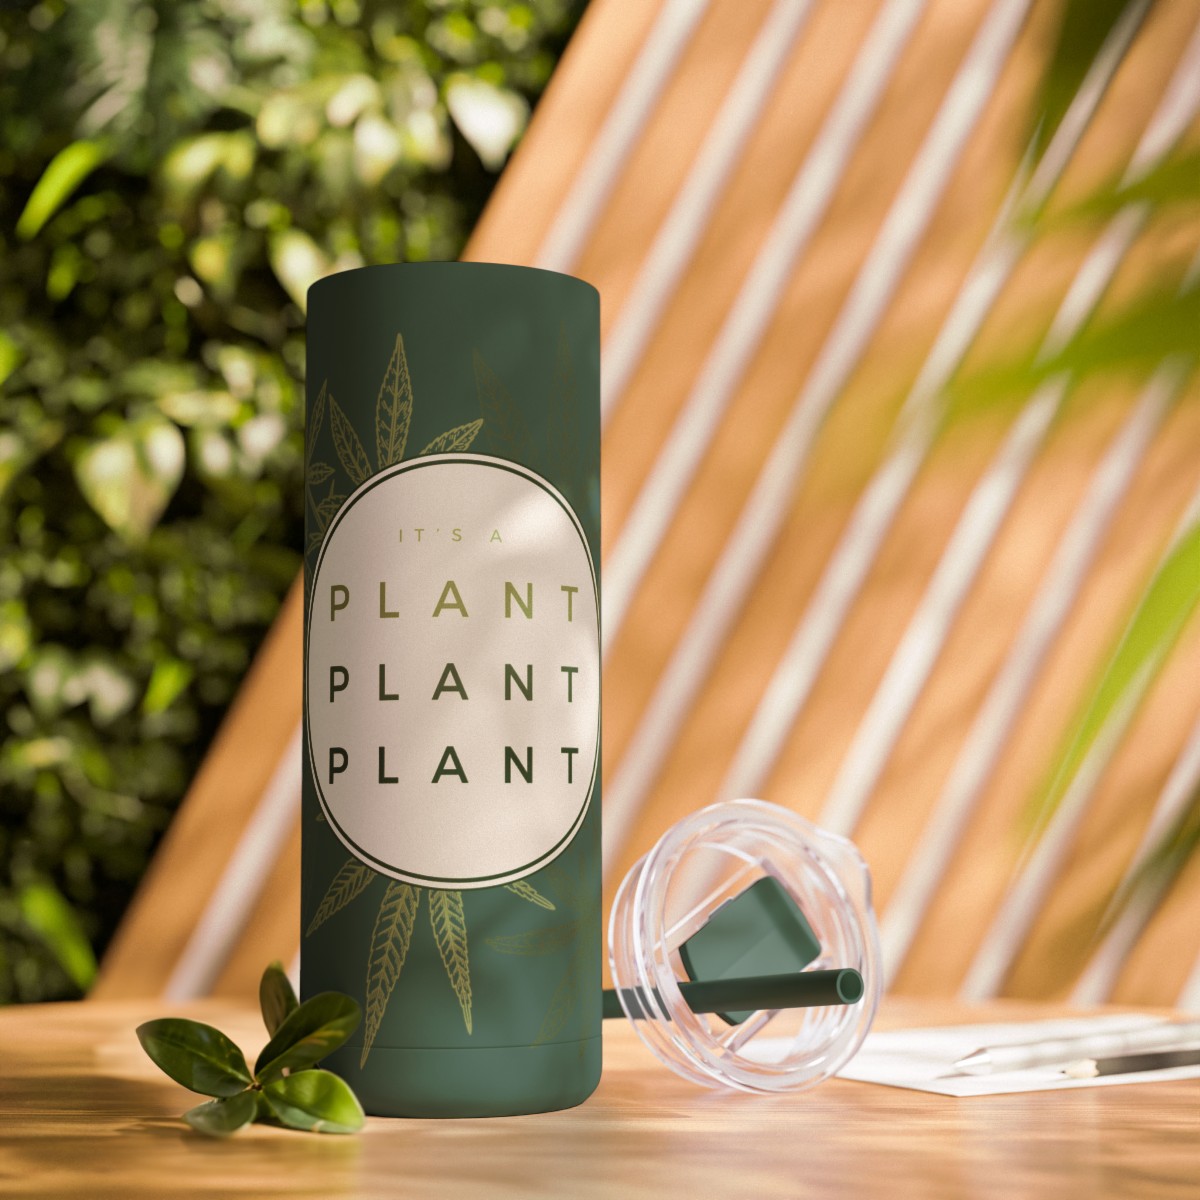 We've got the perfect #elevated #lifestyle #420Merch just for you!

brainforest420.com